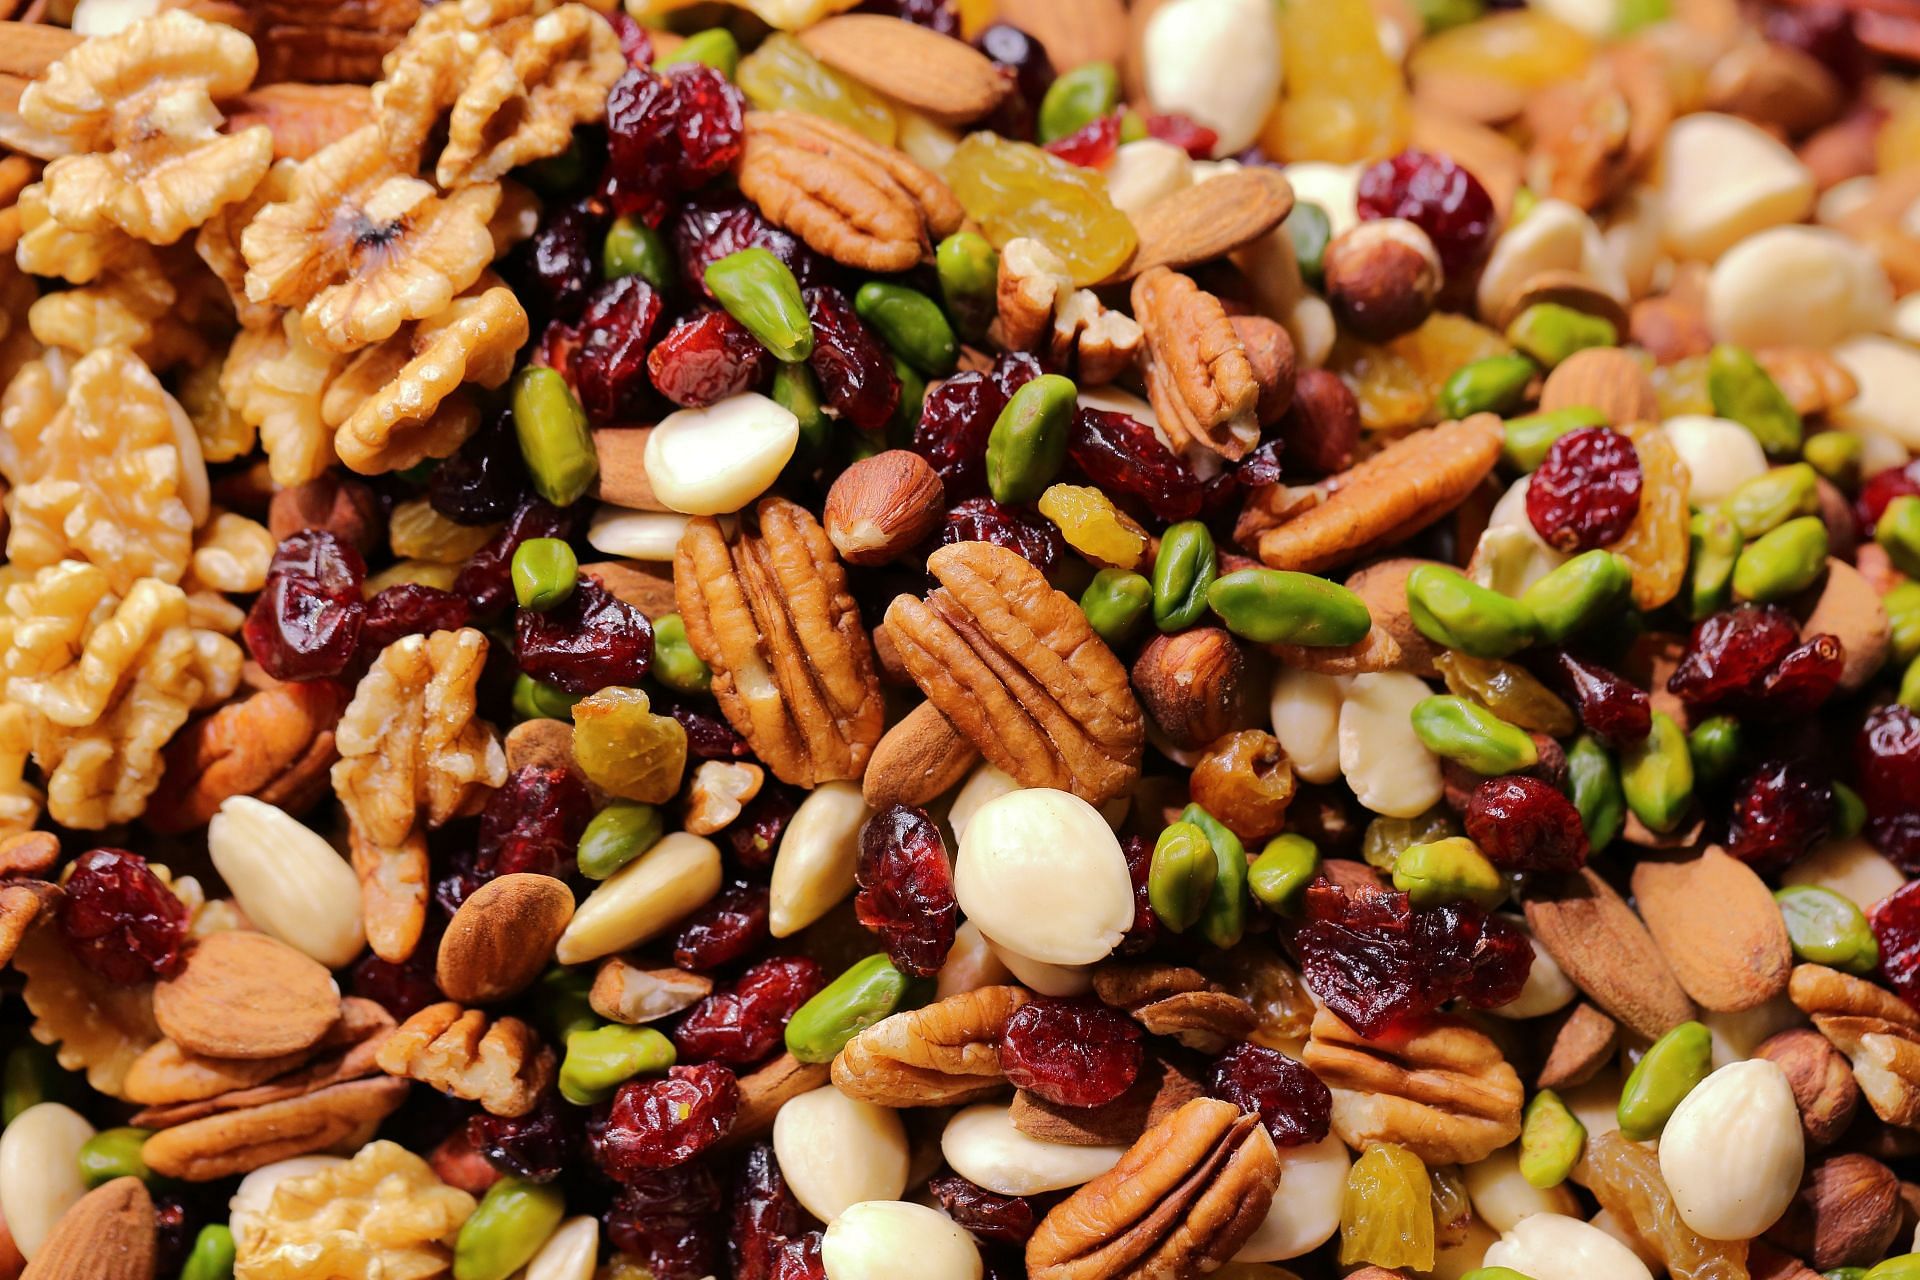 Nuts and seeds should be avoided in this diet. (Image via Unsplash/Maksim Shutov)